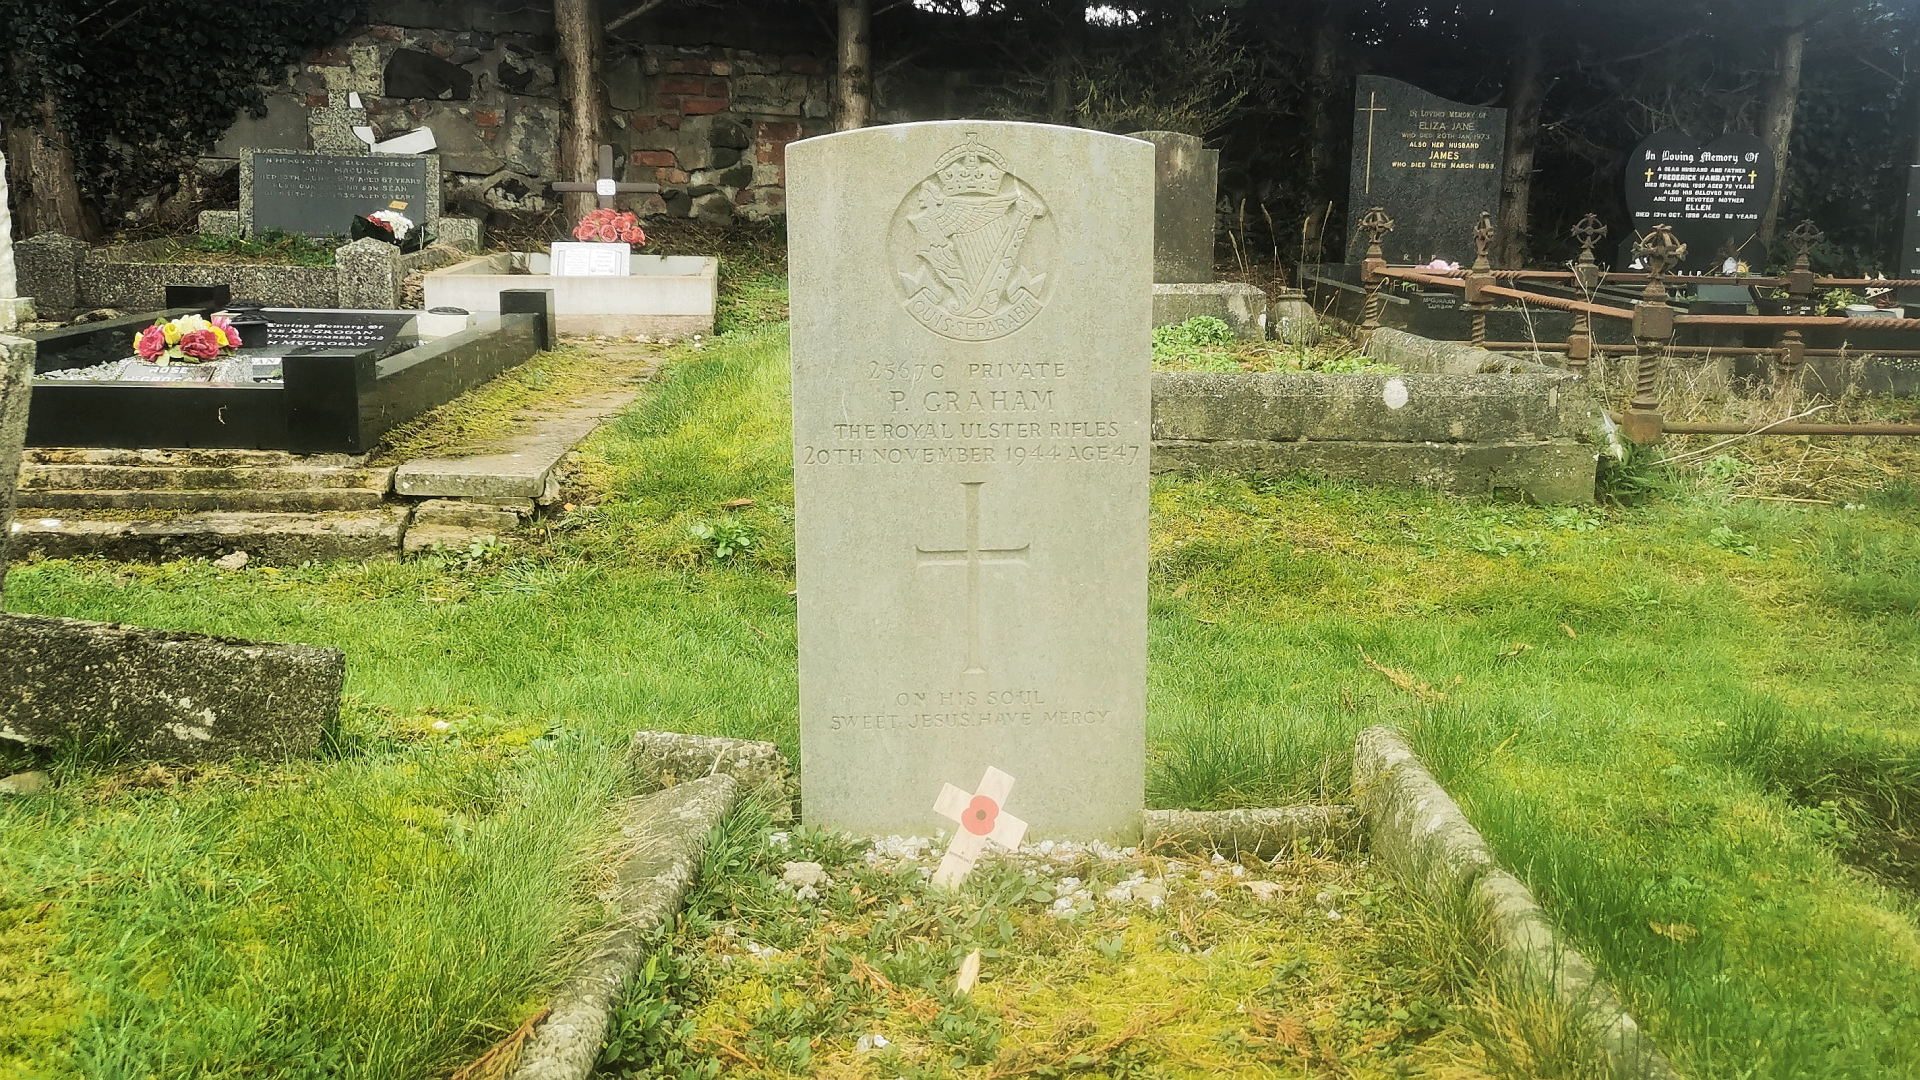 Commonwealth War Grave headstone for Private Patrick Graham (Royal Ulster Rifles) in Holy Trinity Cemetery, Lisburn, Co. Antrim.